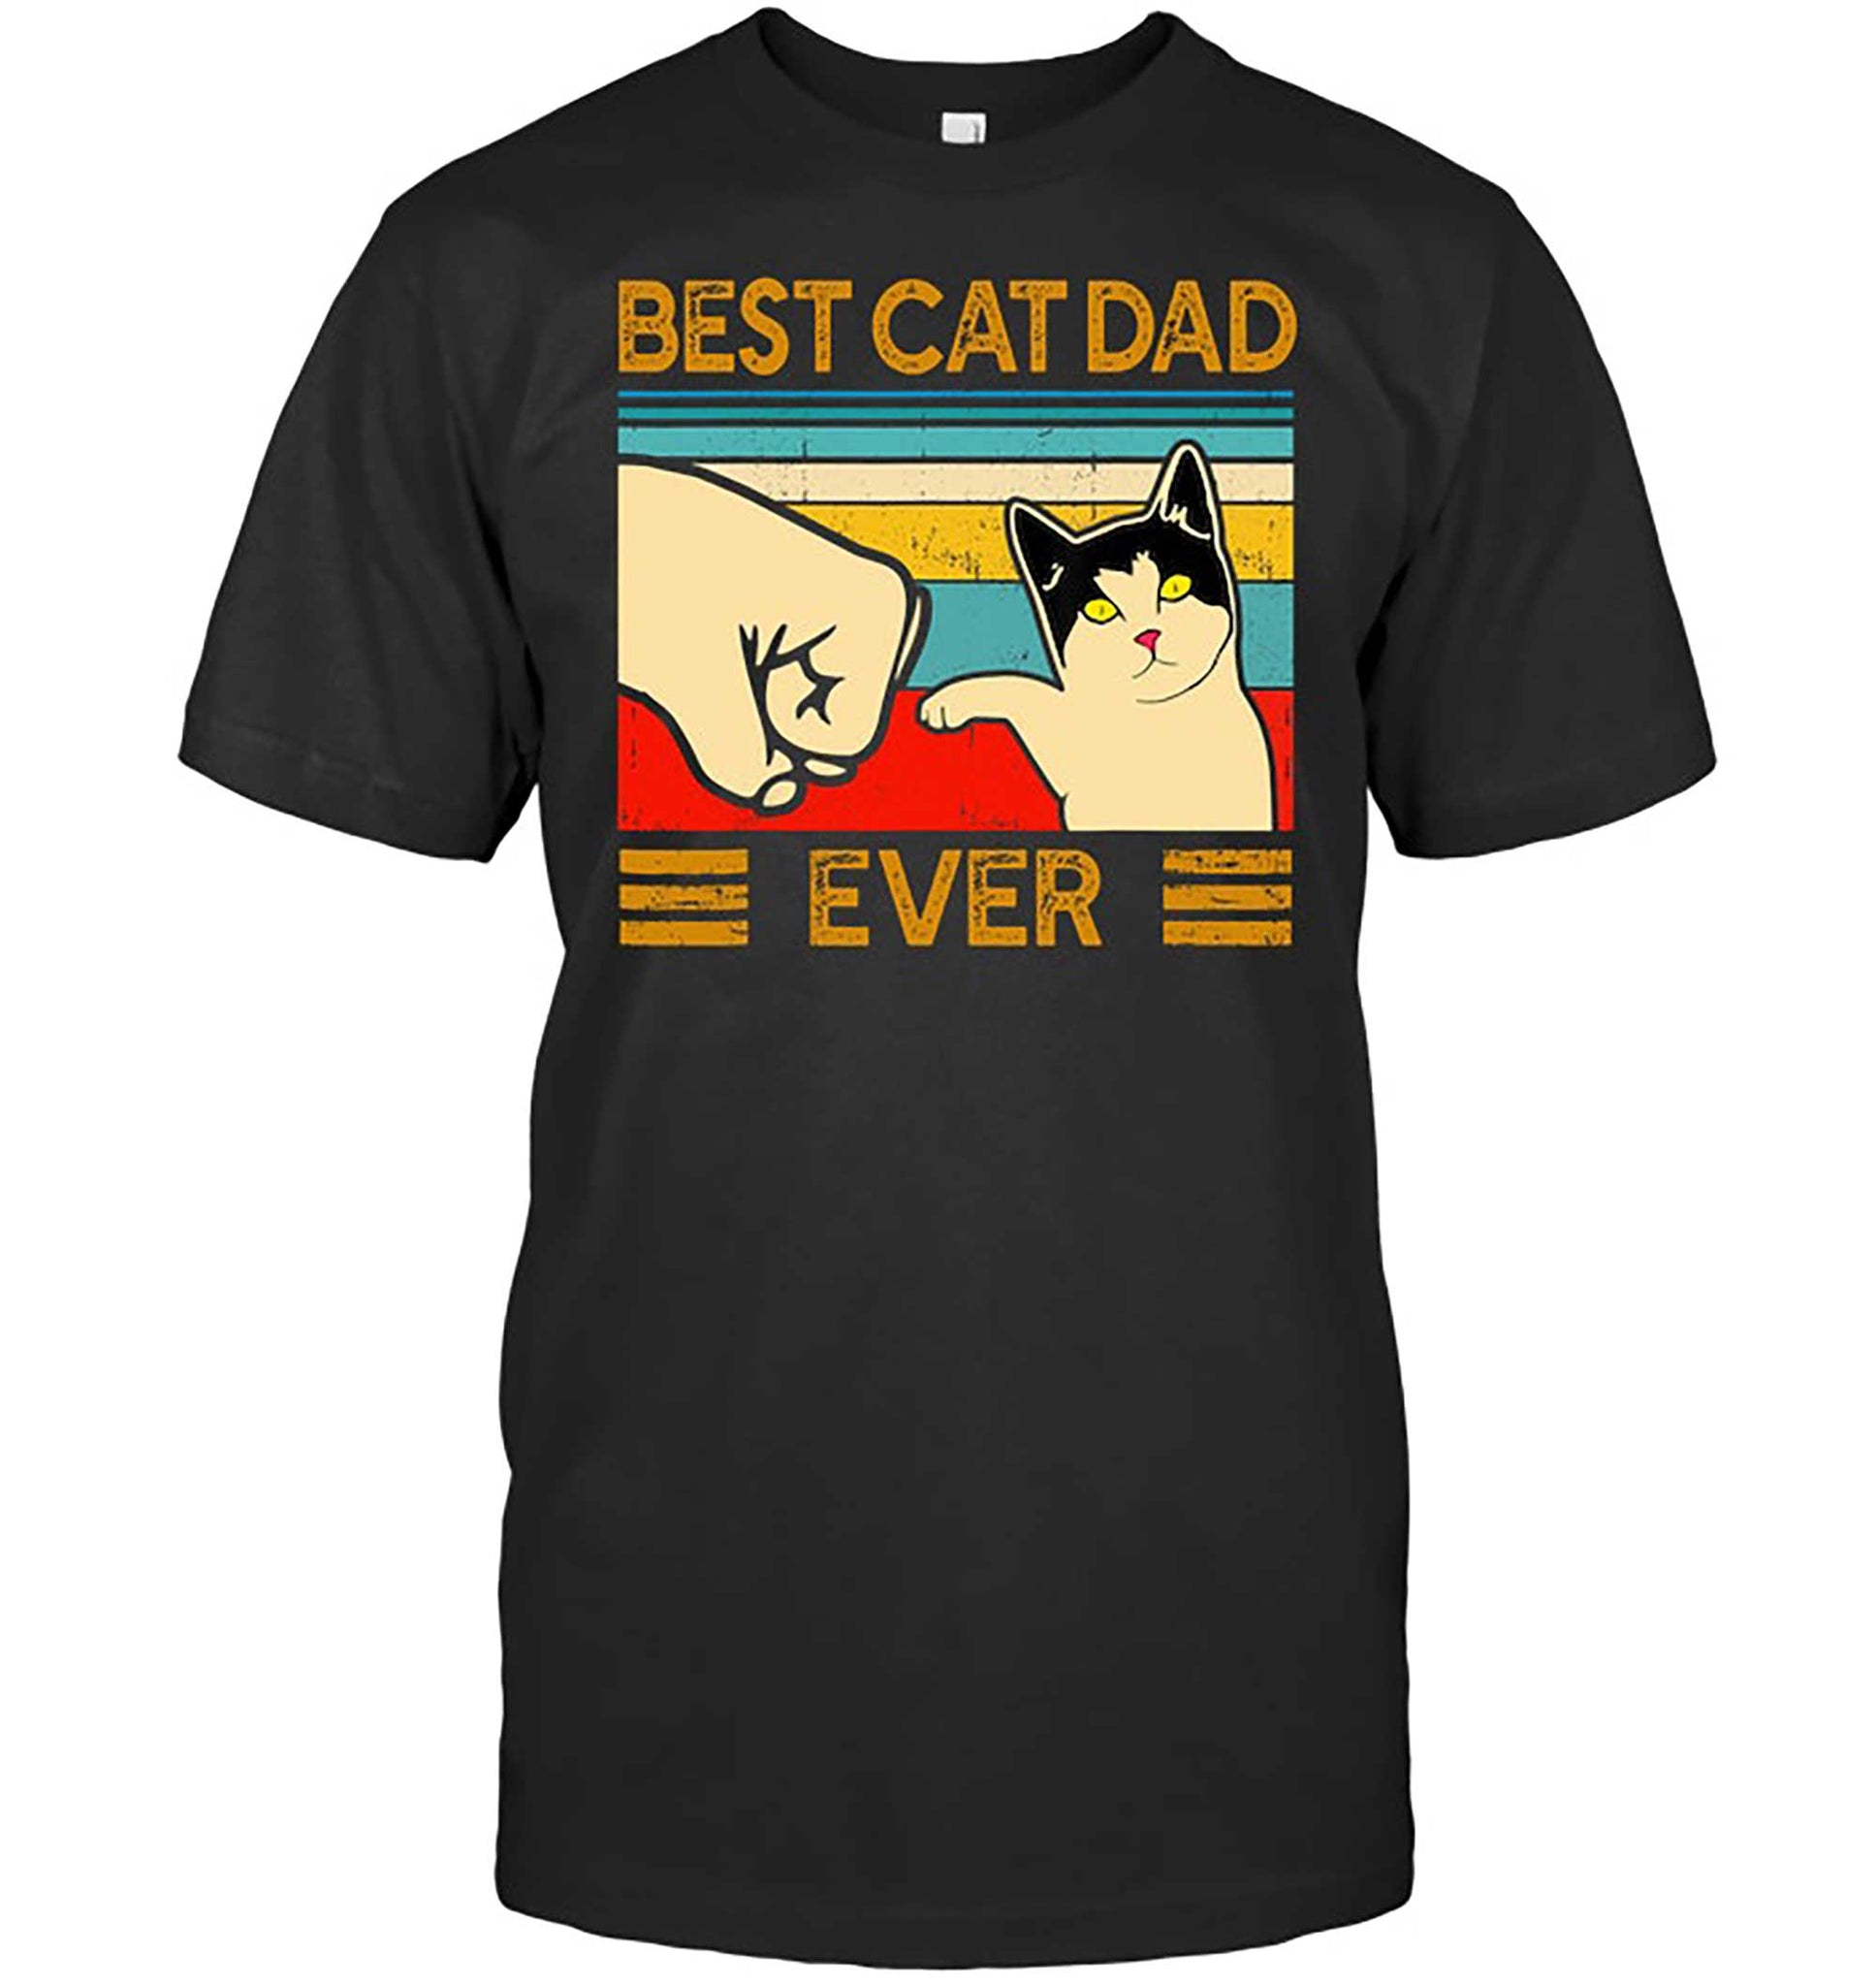 Skitongift-Best-Cat-Dad-Ever-T-Shirt-Funny-Cat-Daddy-FatherS-Day-Gift-Funny-Shirts-Hoodie-Sweater-Short-Sleeve-Casual-Shirt